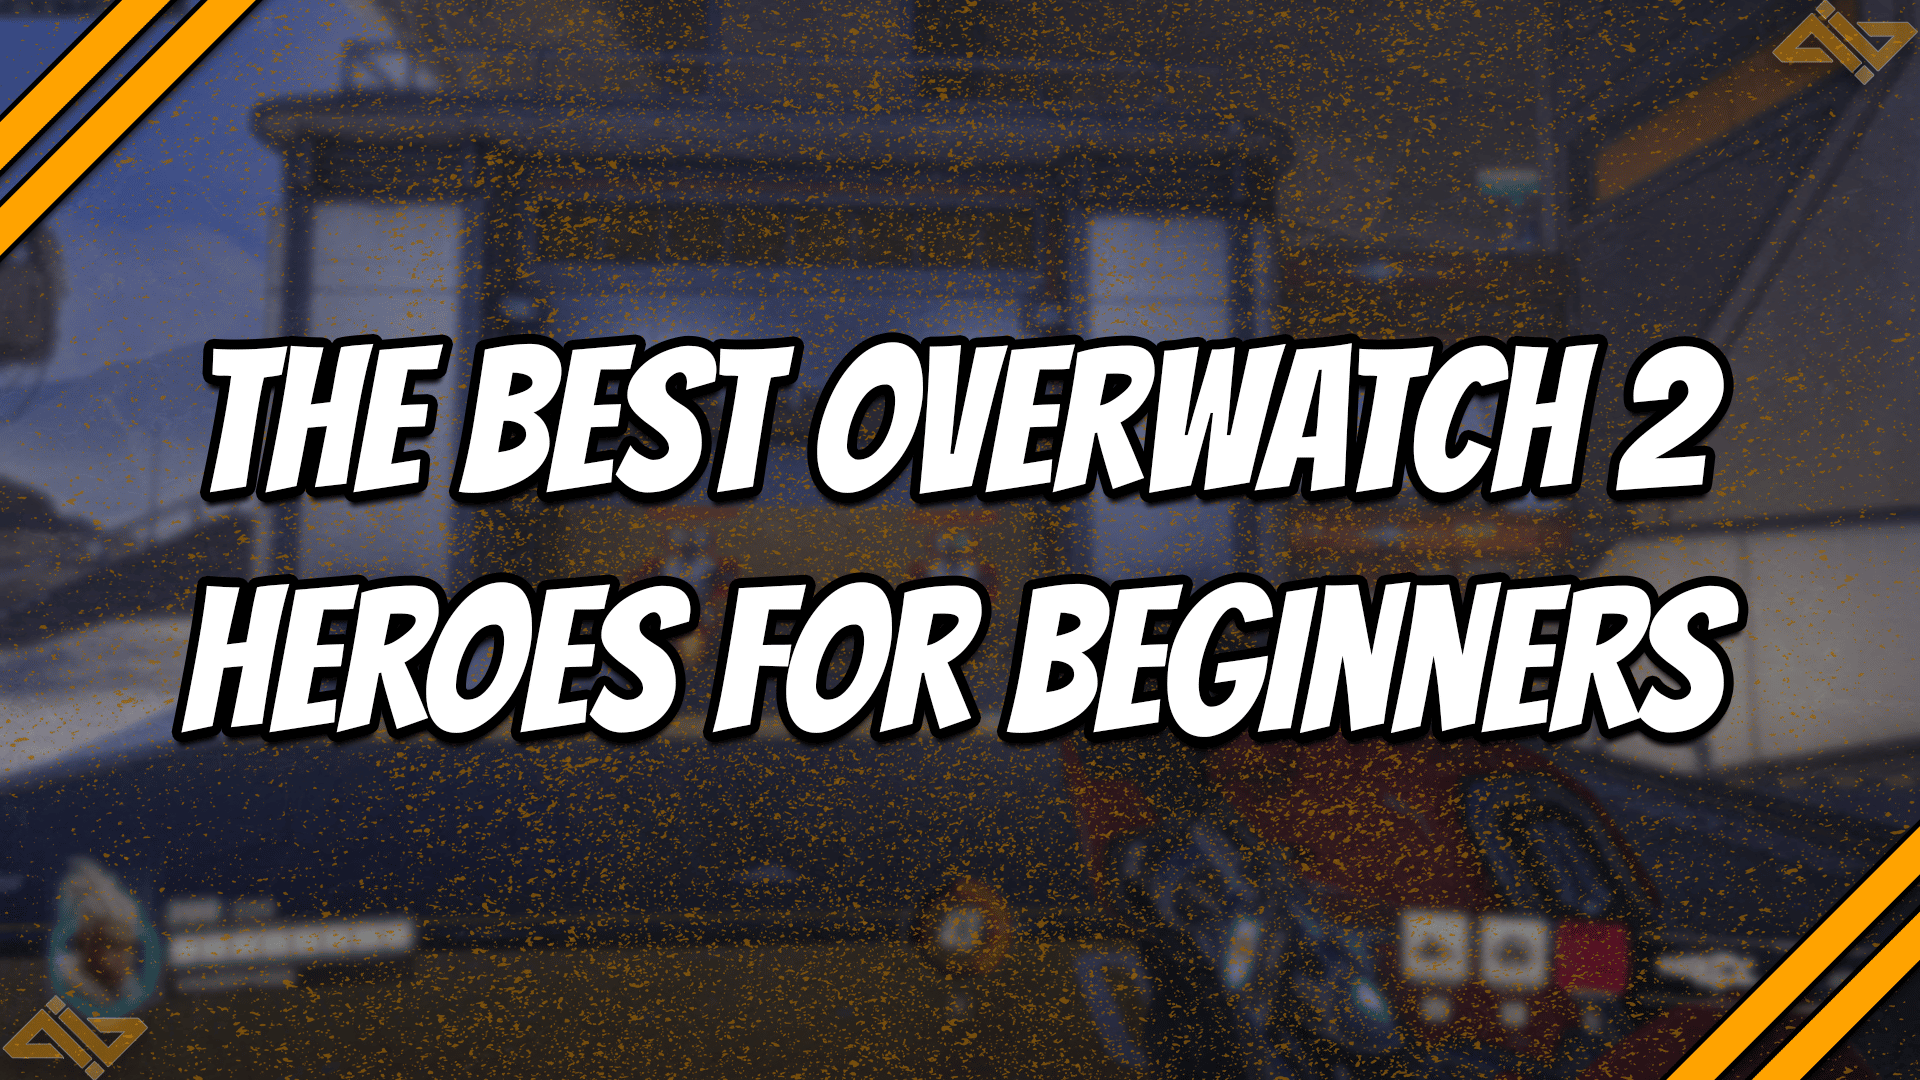 The best overwatch 2 Heroes for Beginners title card